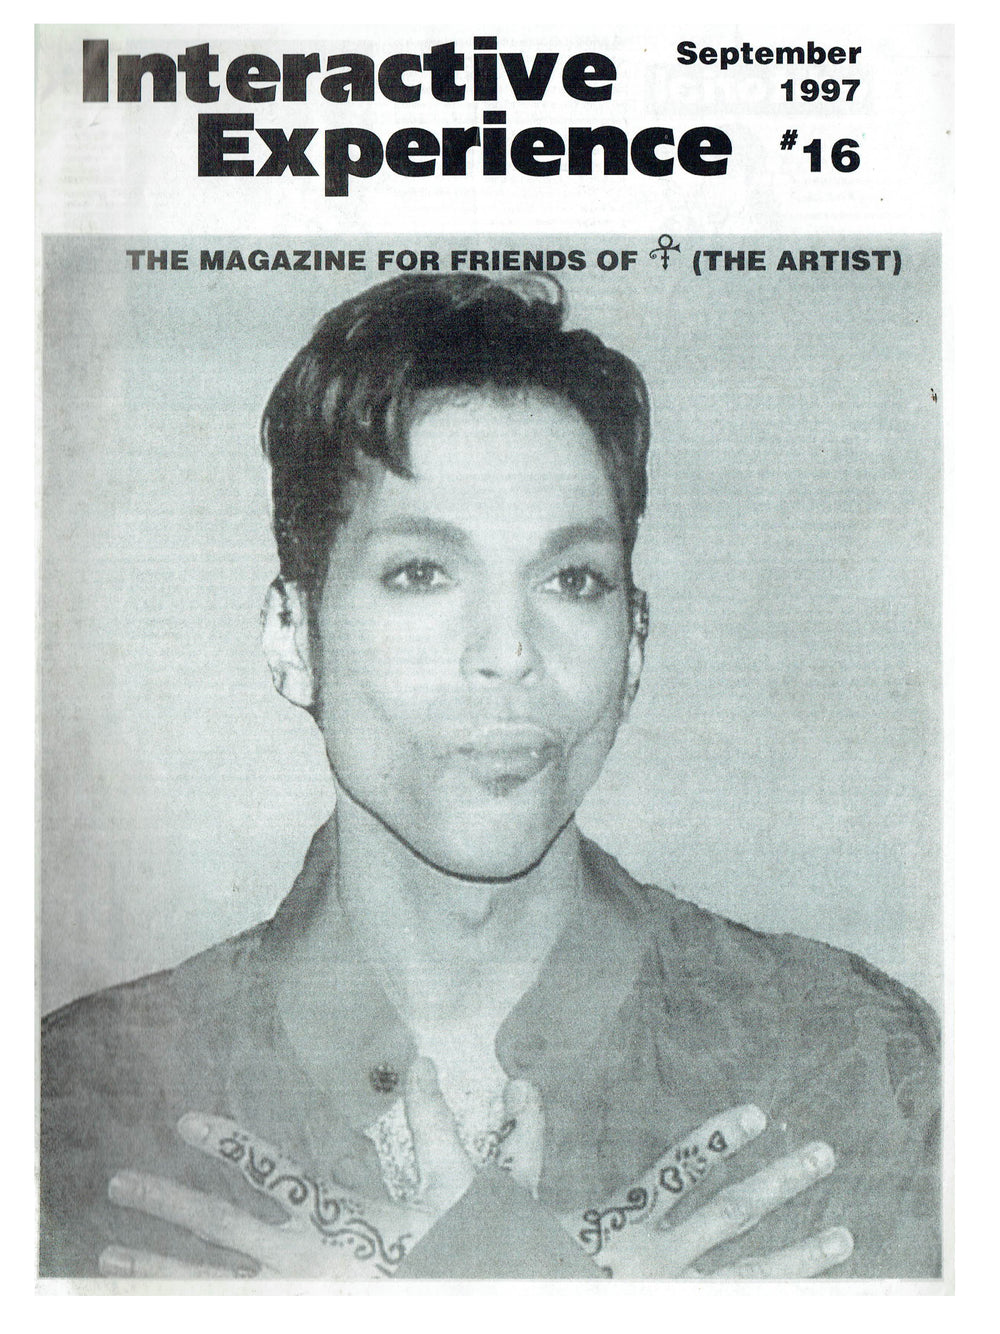 Prince – Interactive Experience Prince Fanzine Publication Issue 16 September 1997